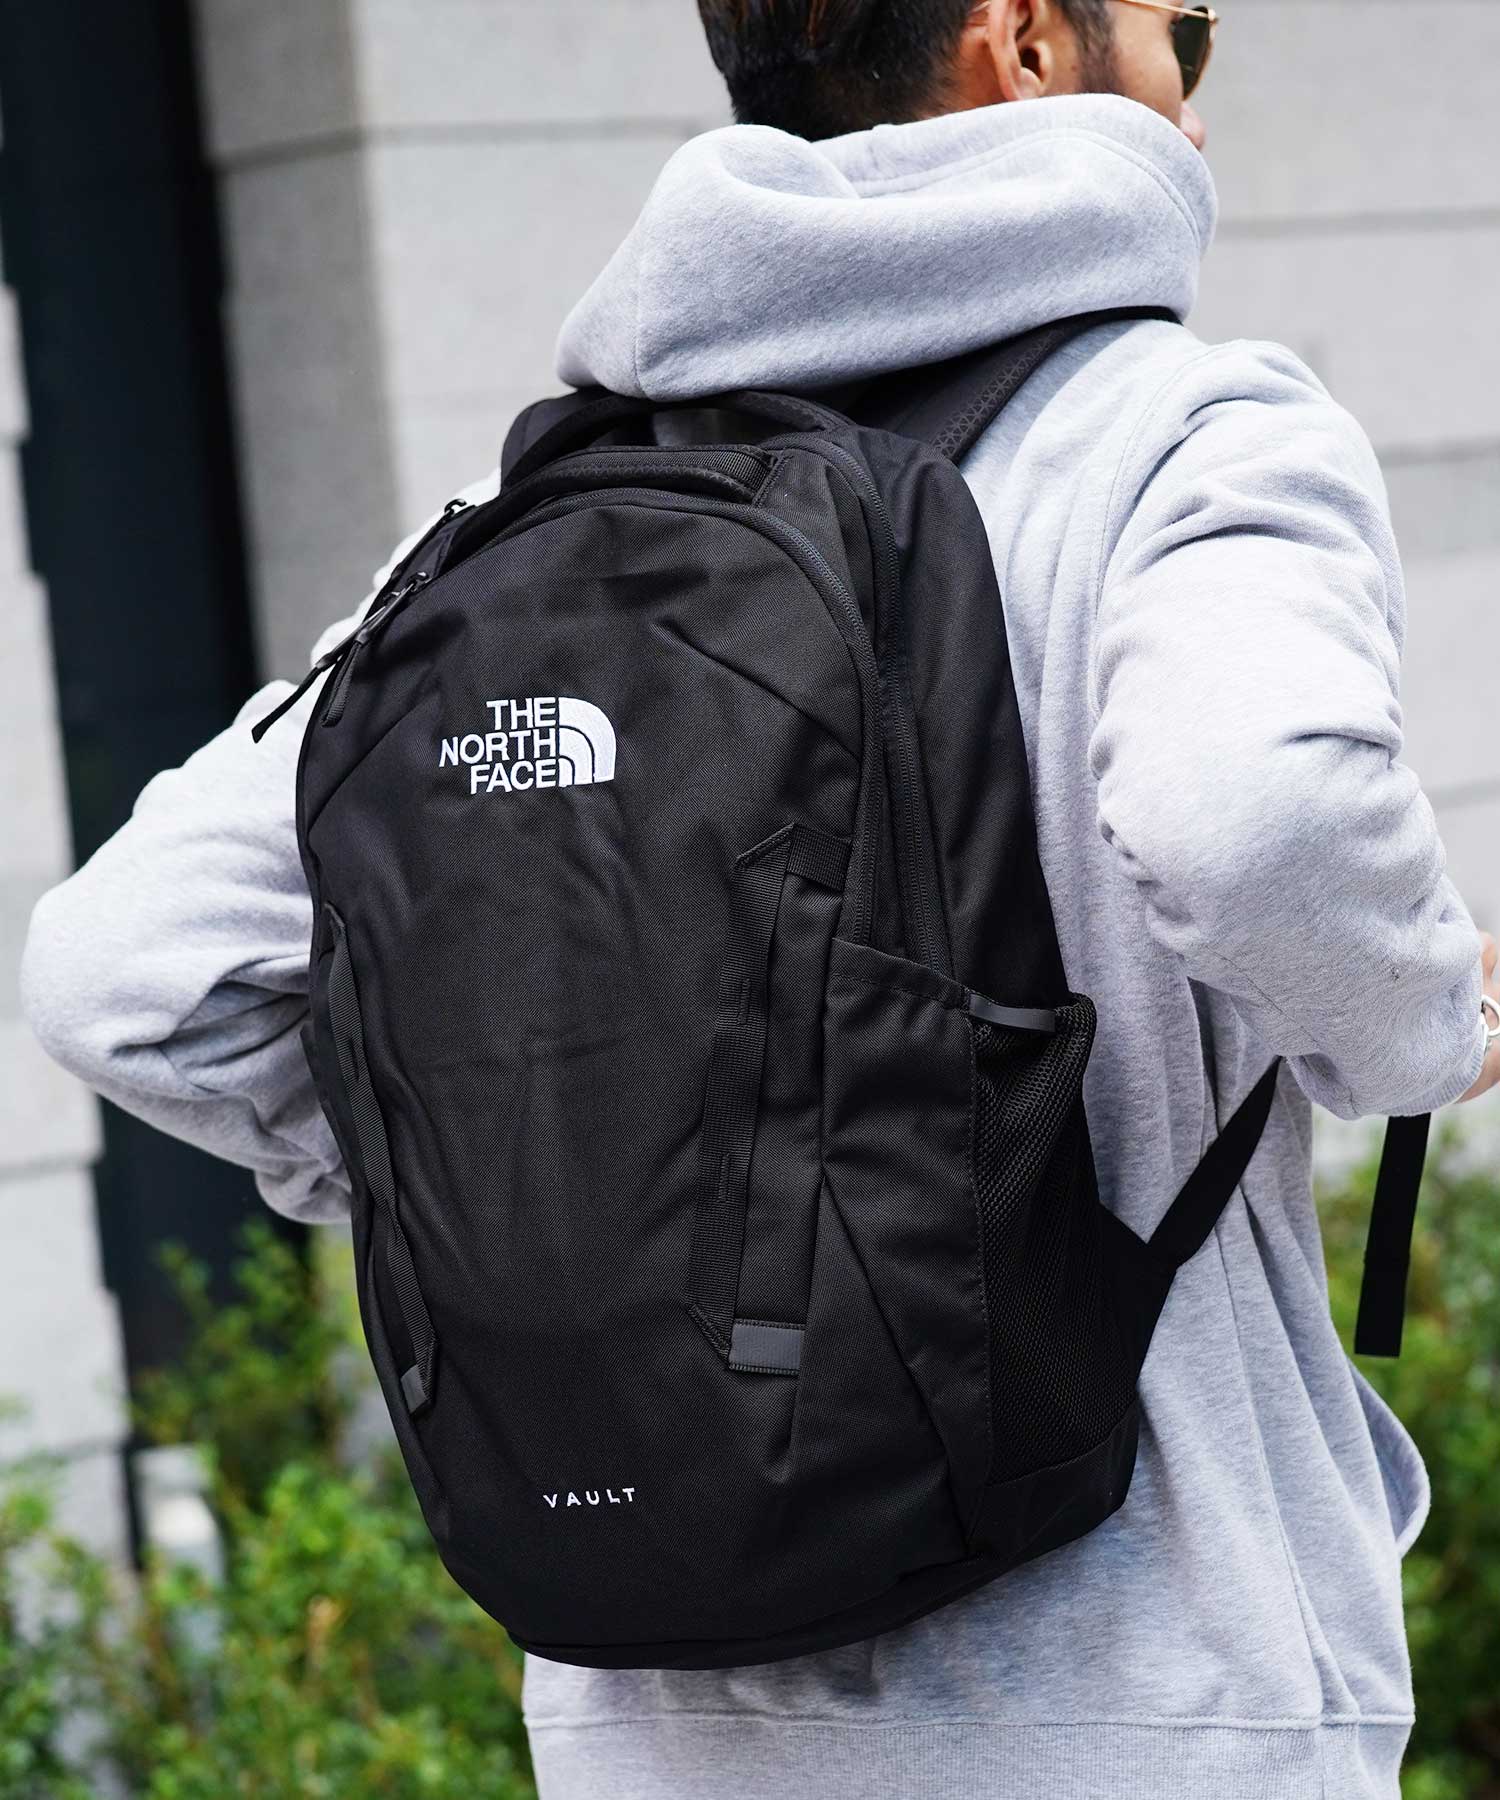 THE NORTH FACE リュックサック、デイパック（柄：文字、メッセージ 